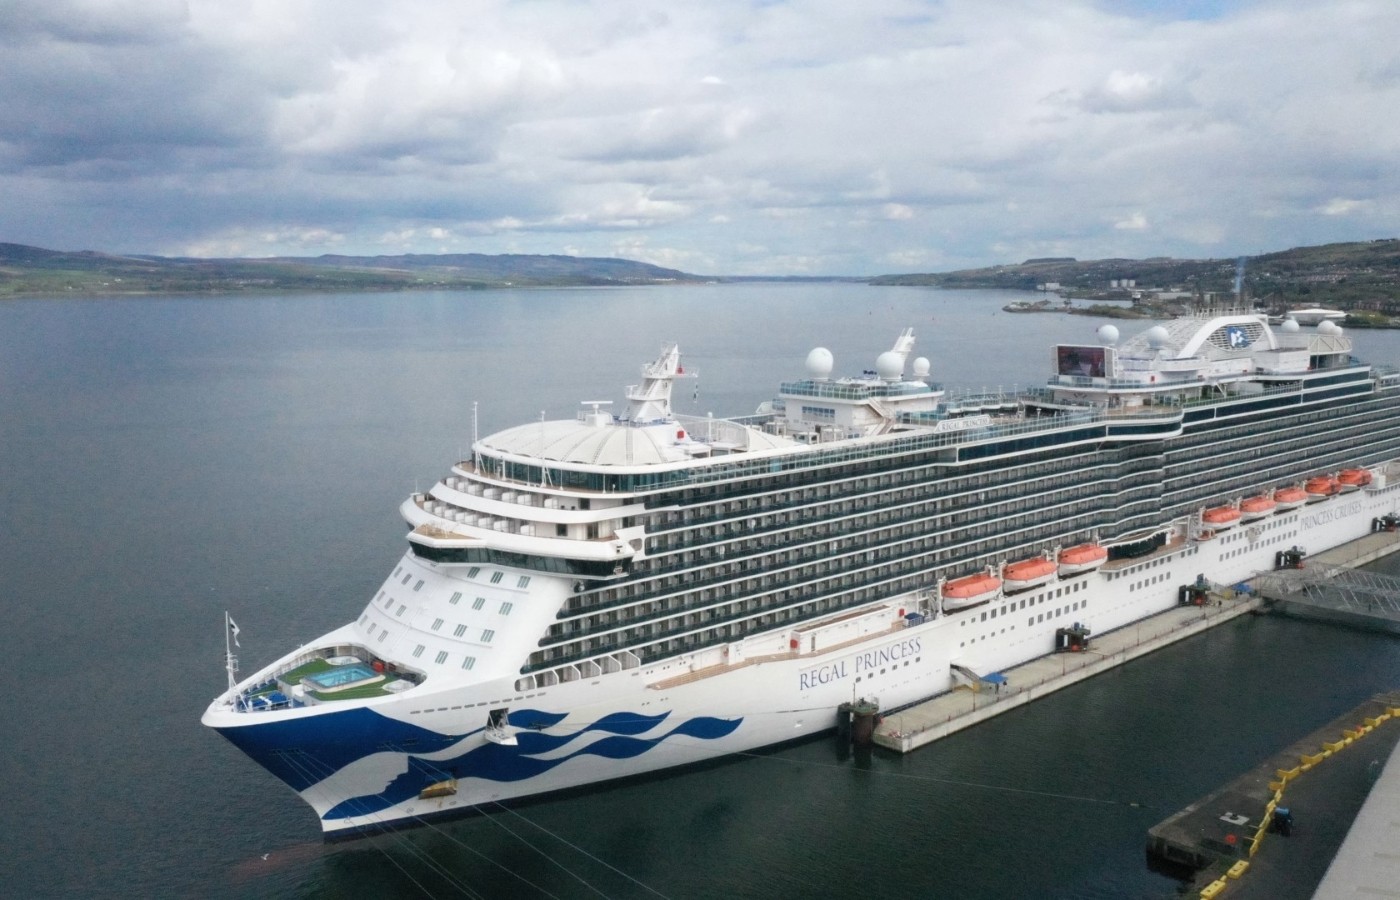 The port welcomed the Regal Princess ship on Friday, capable of carrying over 3000 passengers.